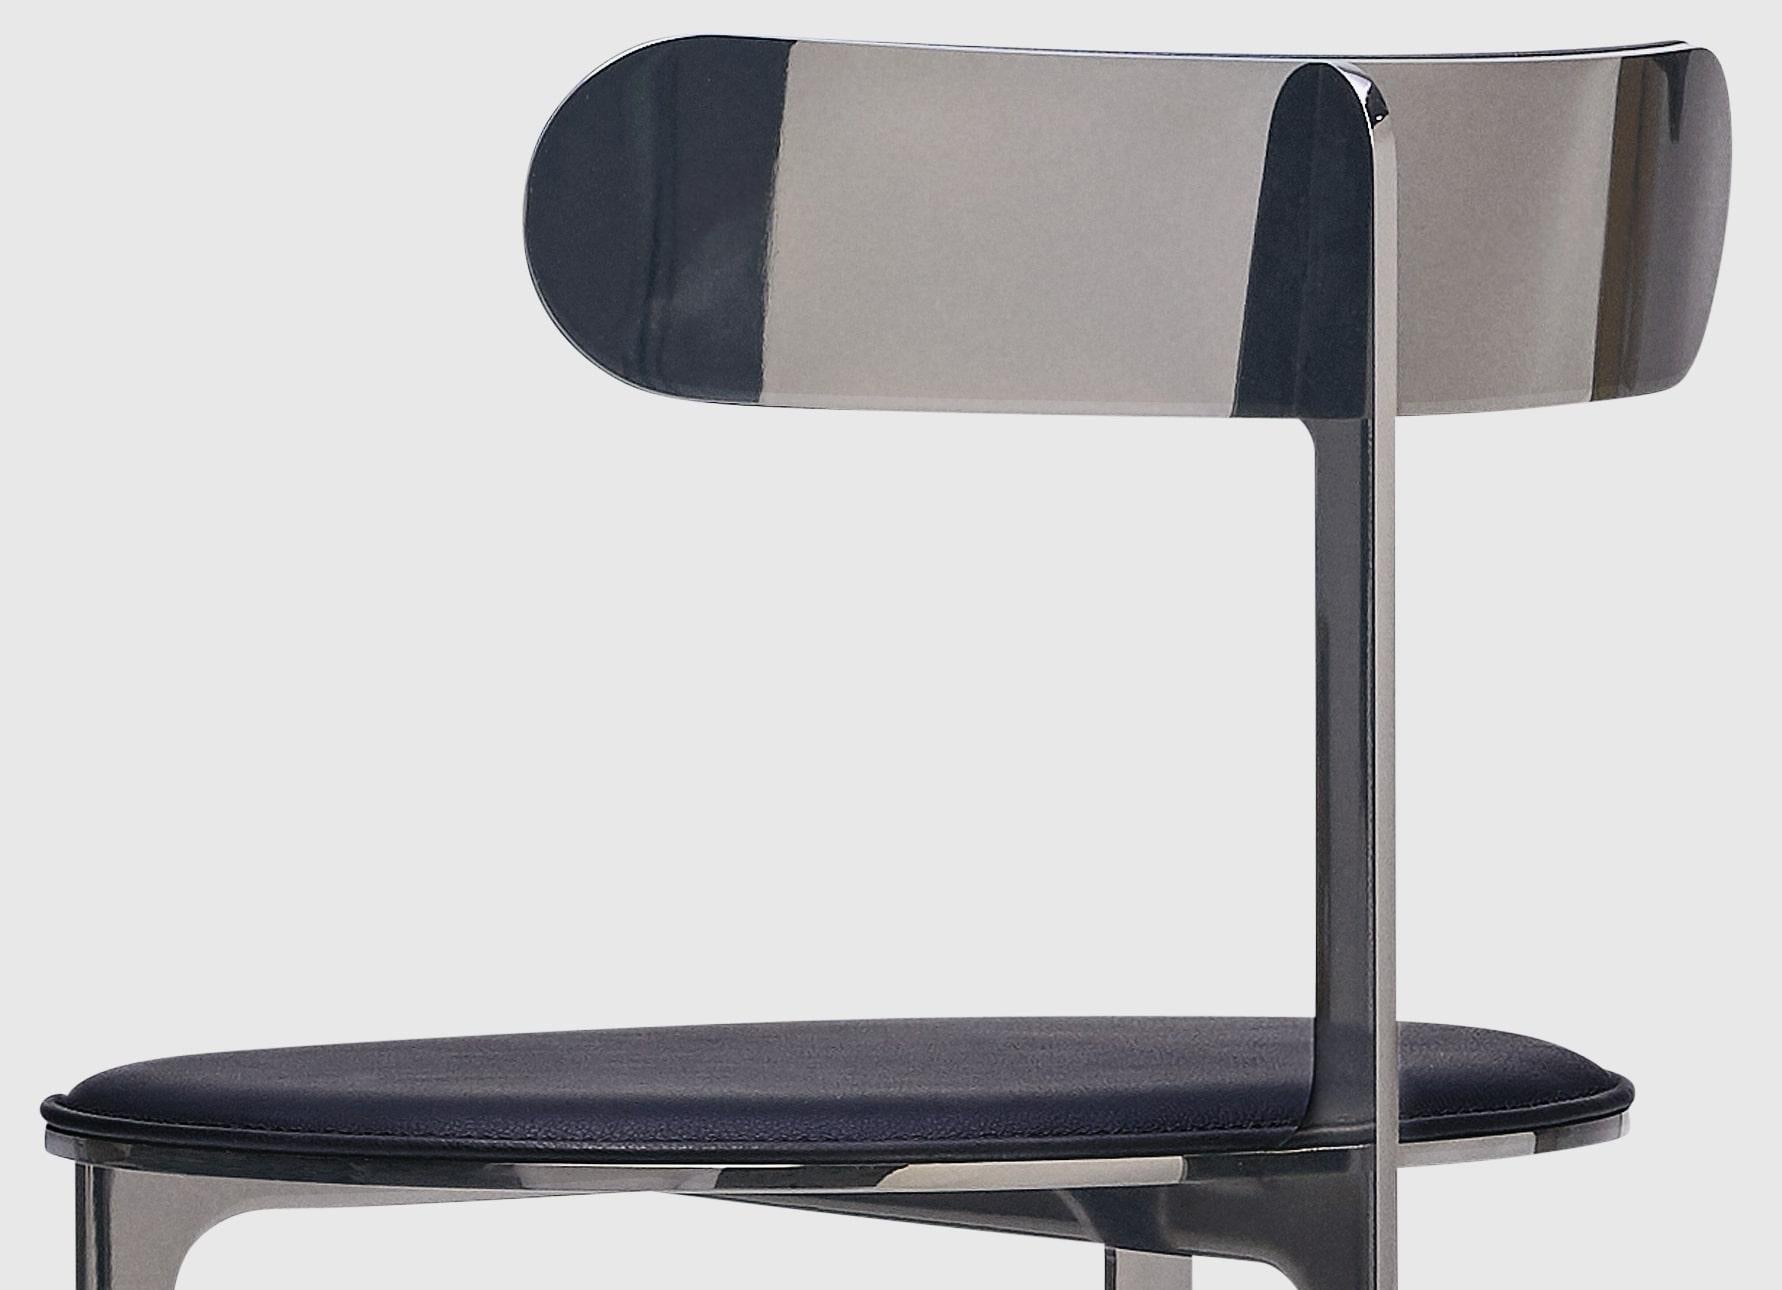 Park Place Dining Chair by Yabu Pushelberg in Black Nickel and Textured Wool In New Condition For Sale In Toronto, ON